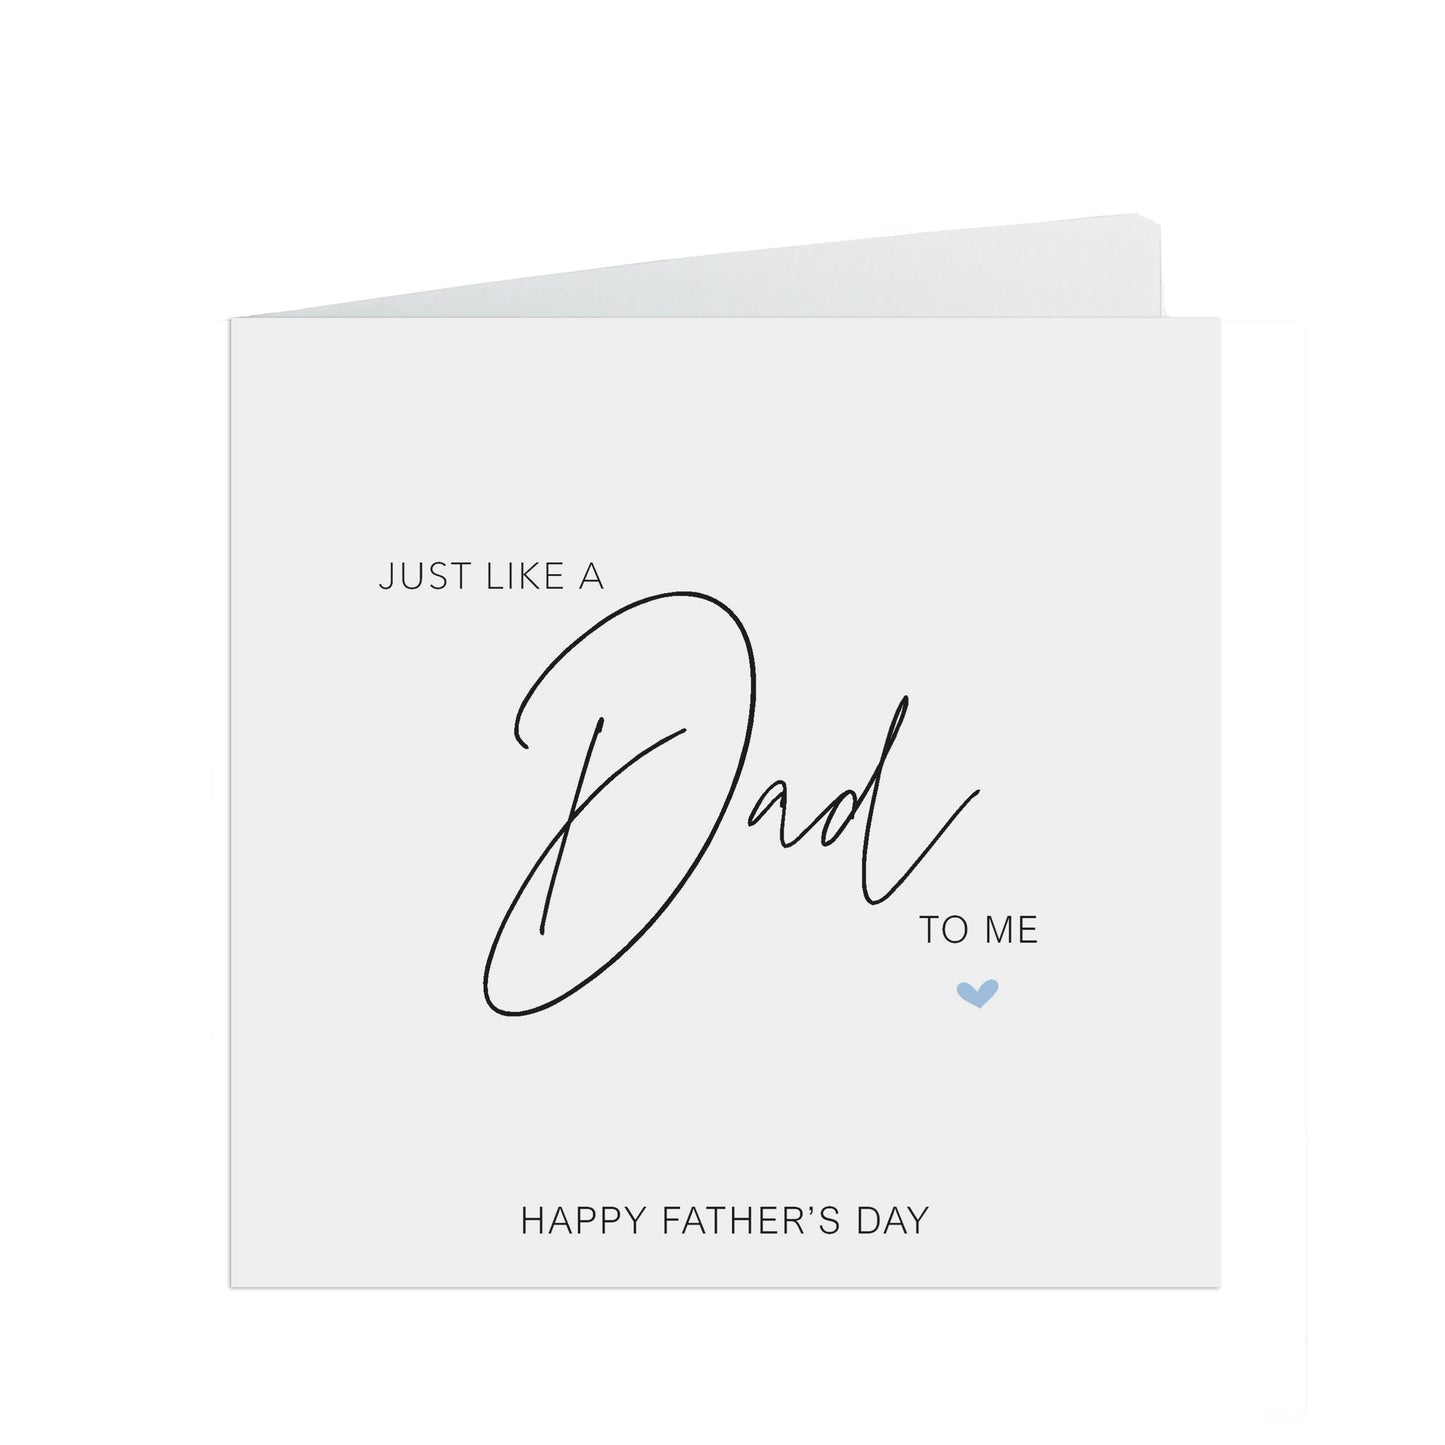  Just Like A Dad To Me, Simple Father's Day Card by PMPRINTED 